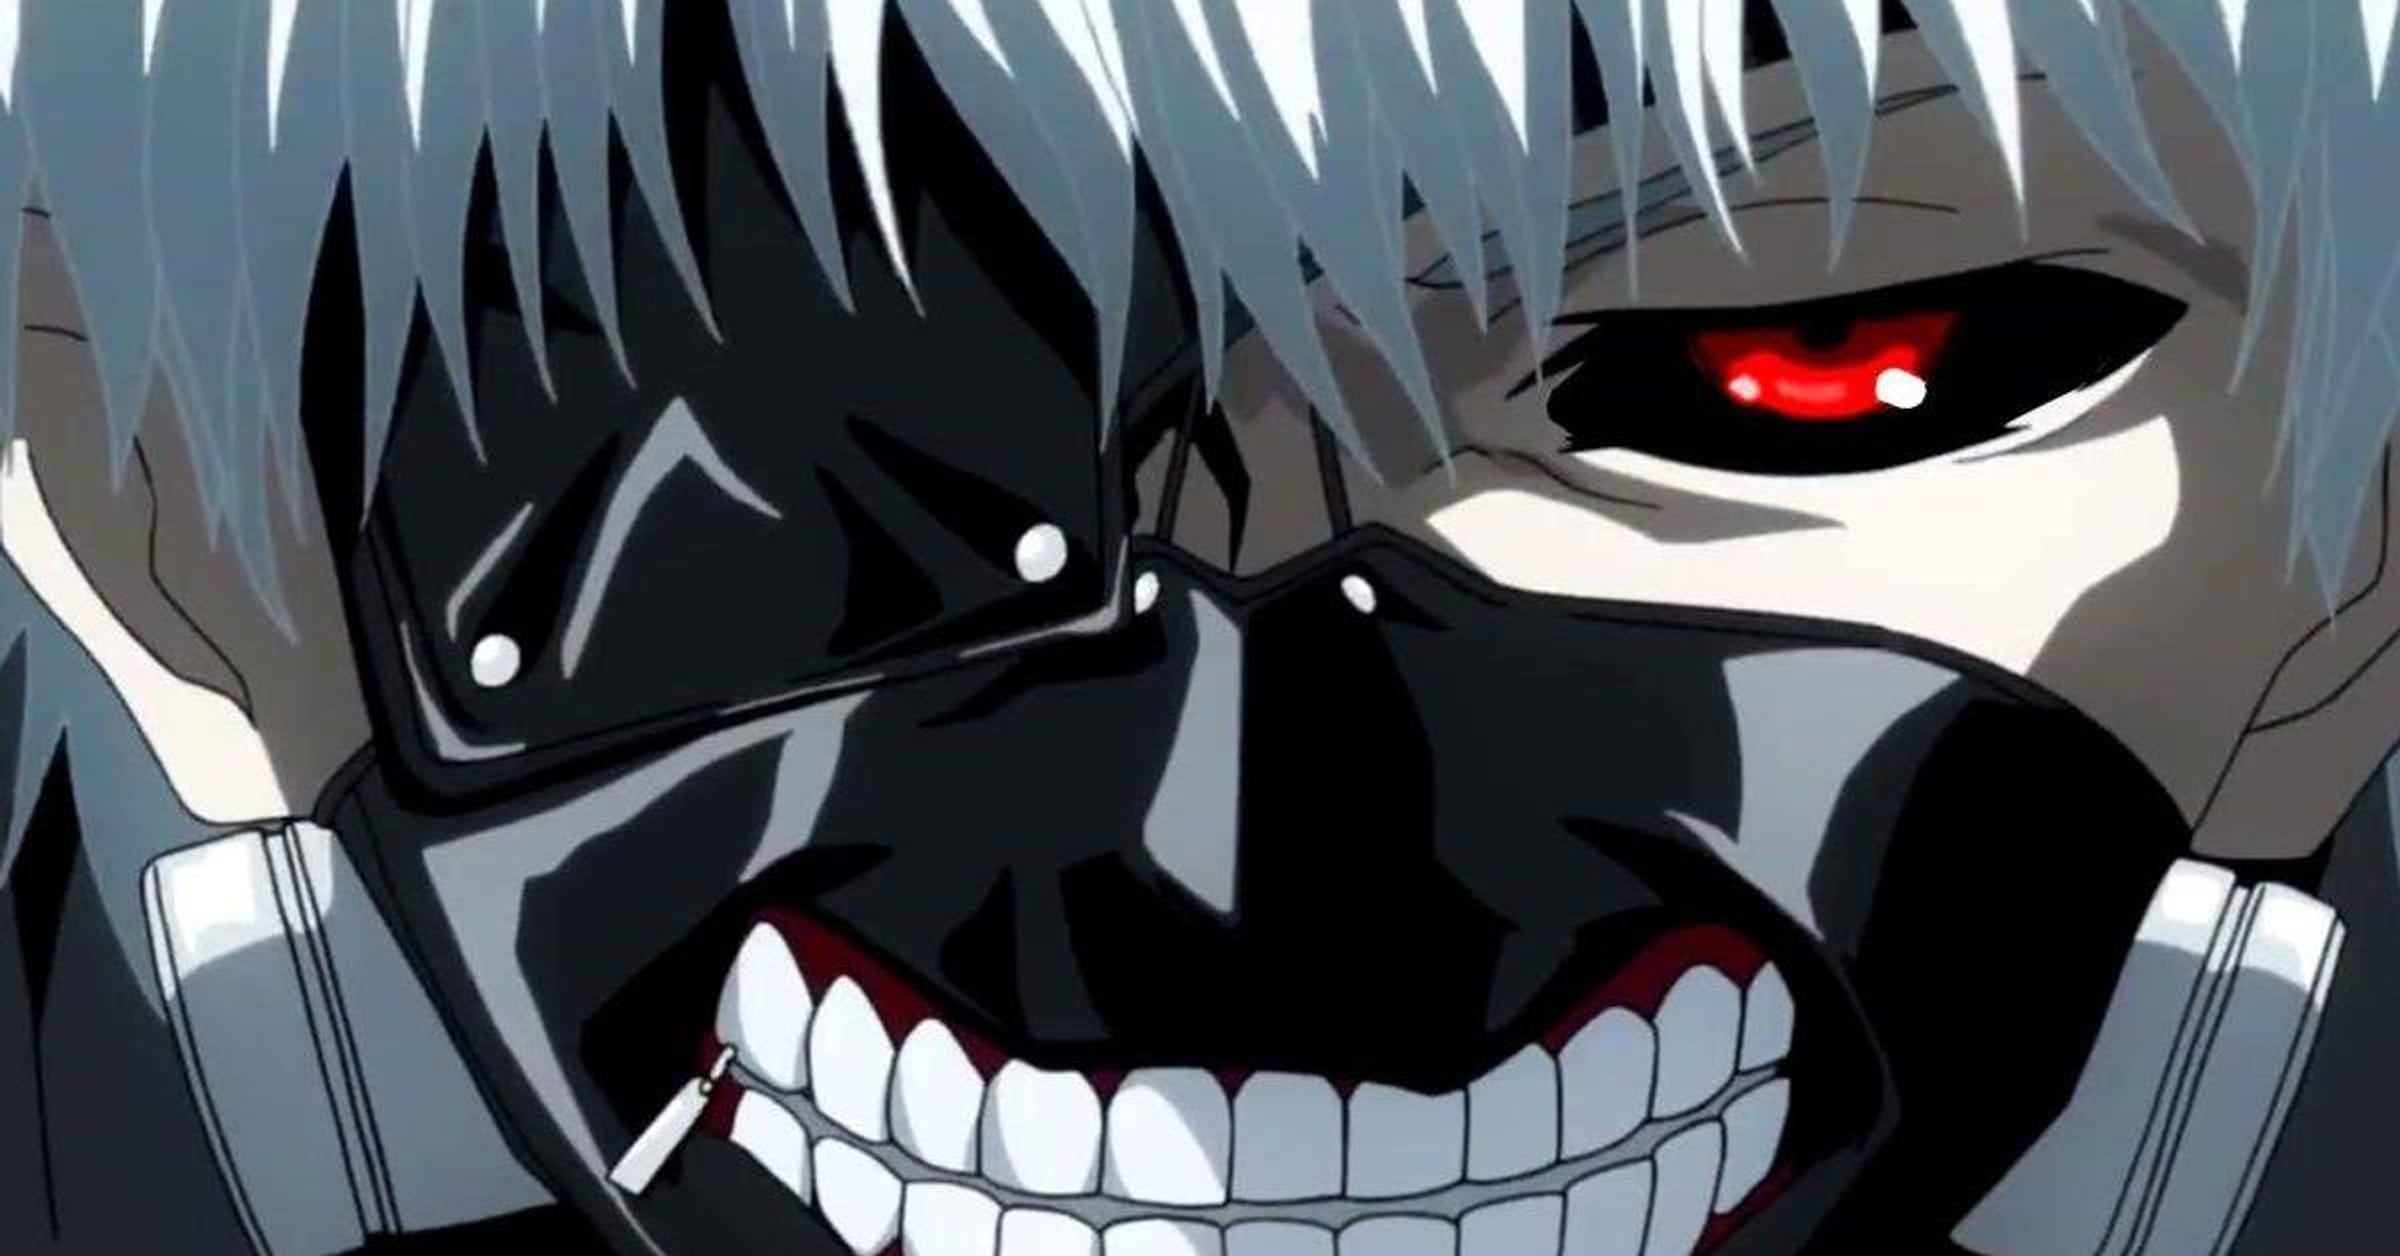 Tokyo Ghoul - BR + Animes